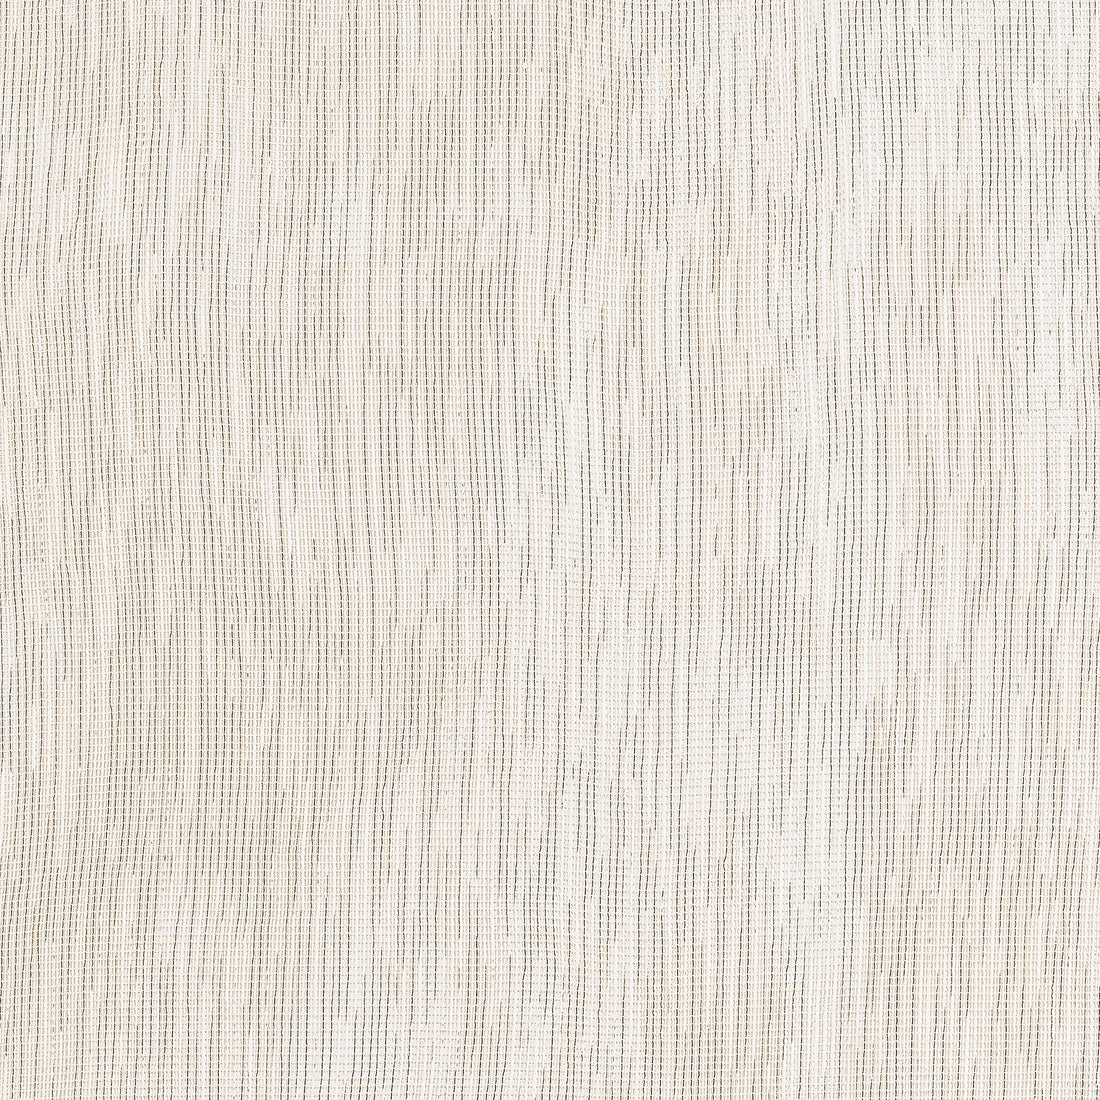 Makani fabric in sand color - pattern number FWW81762 - by Thibaut in the Locale Wide Width collection